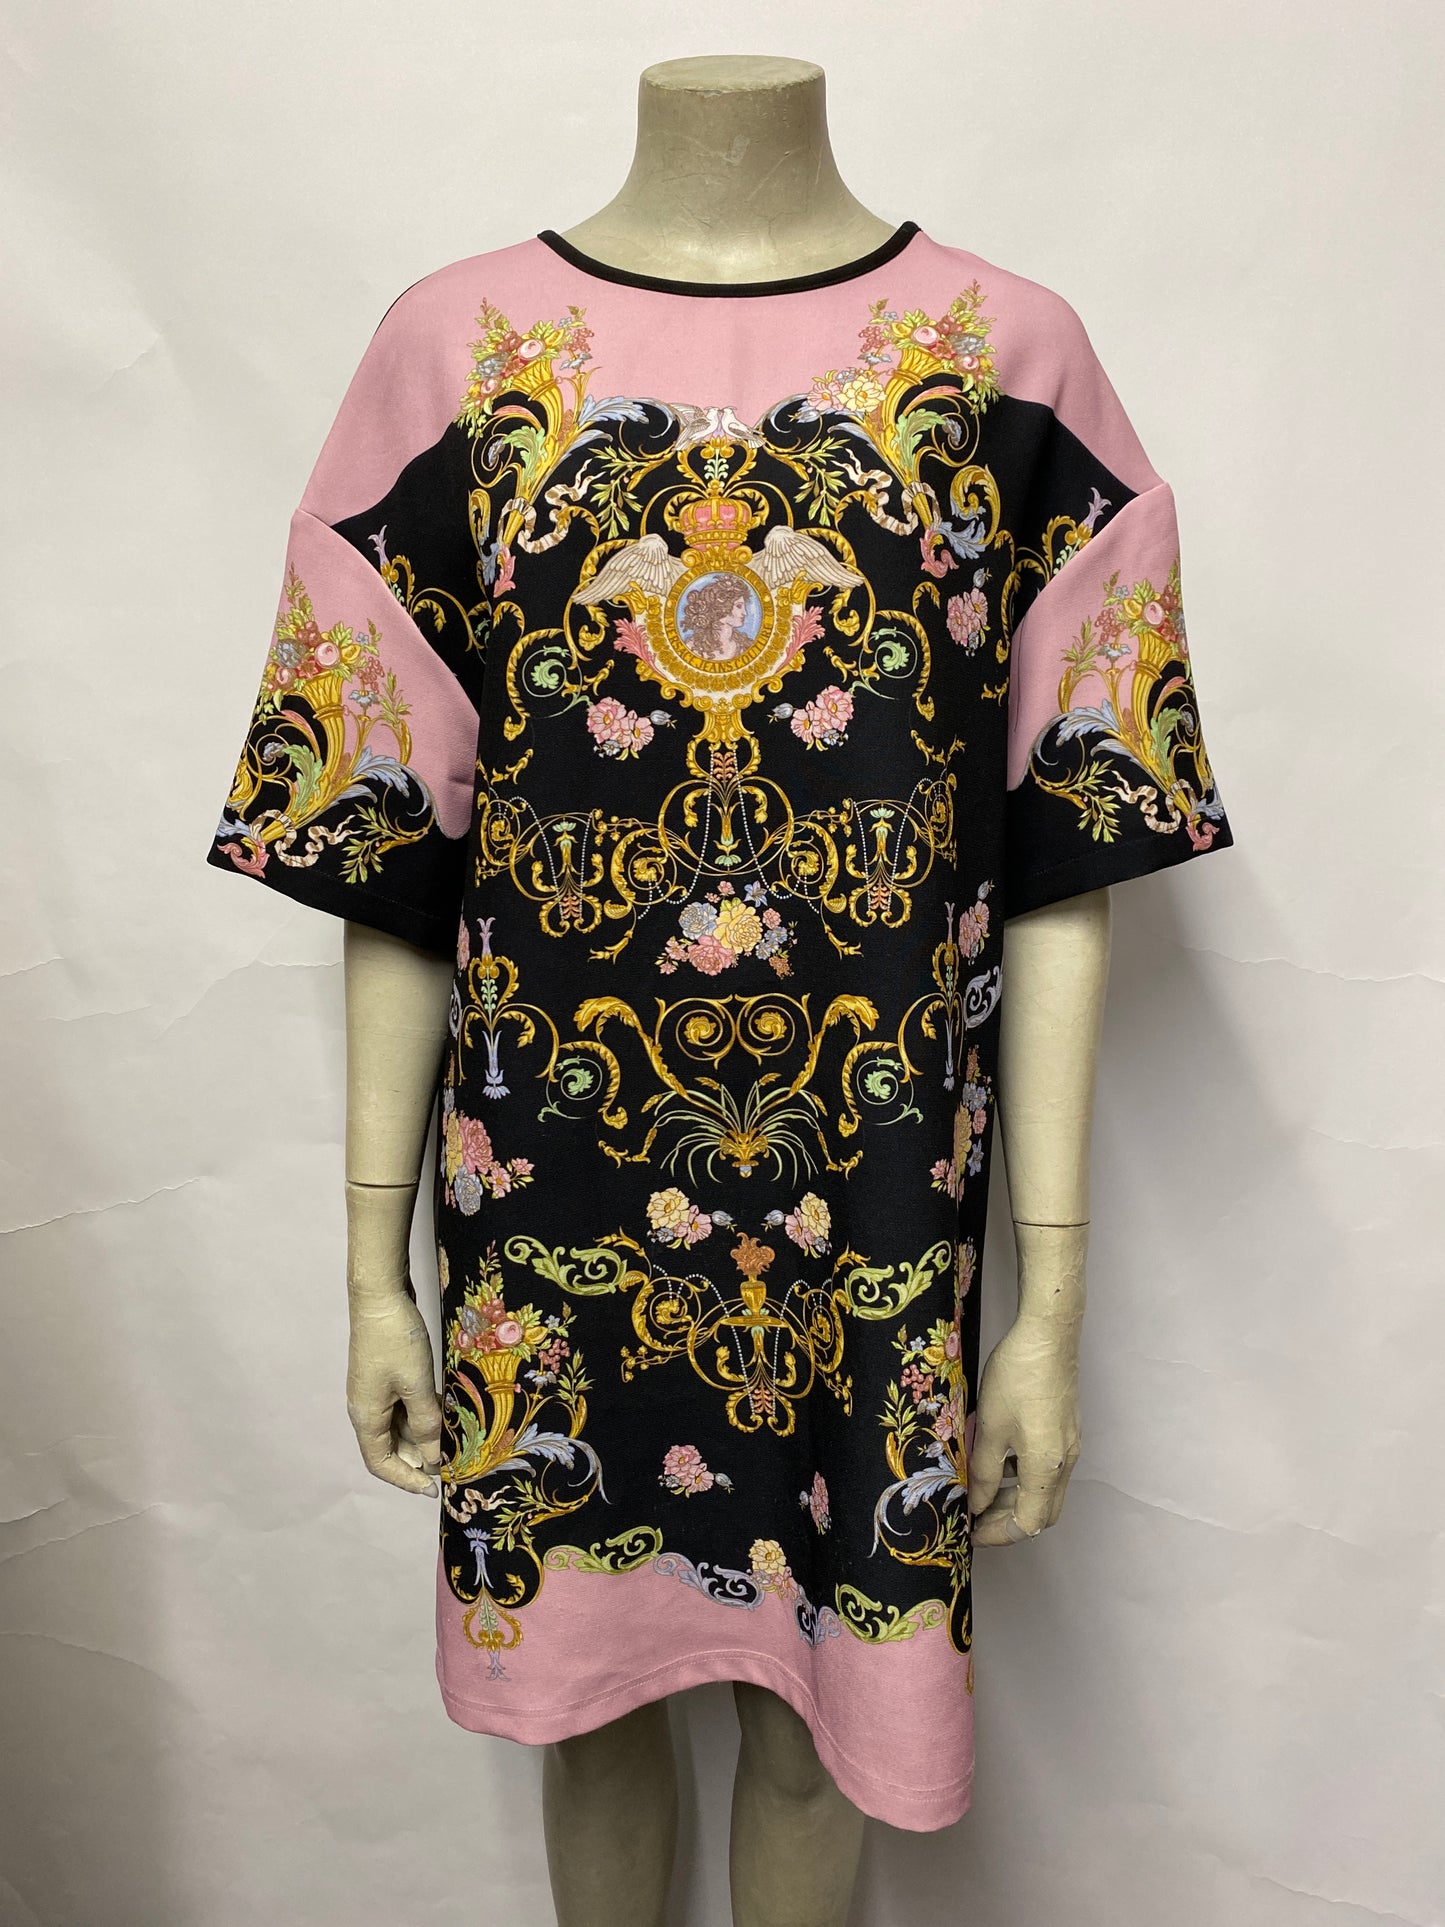 Versace Jeans Couture Black and Pink Graphic Patterned T-shirt Dress 12